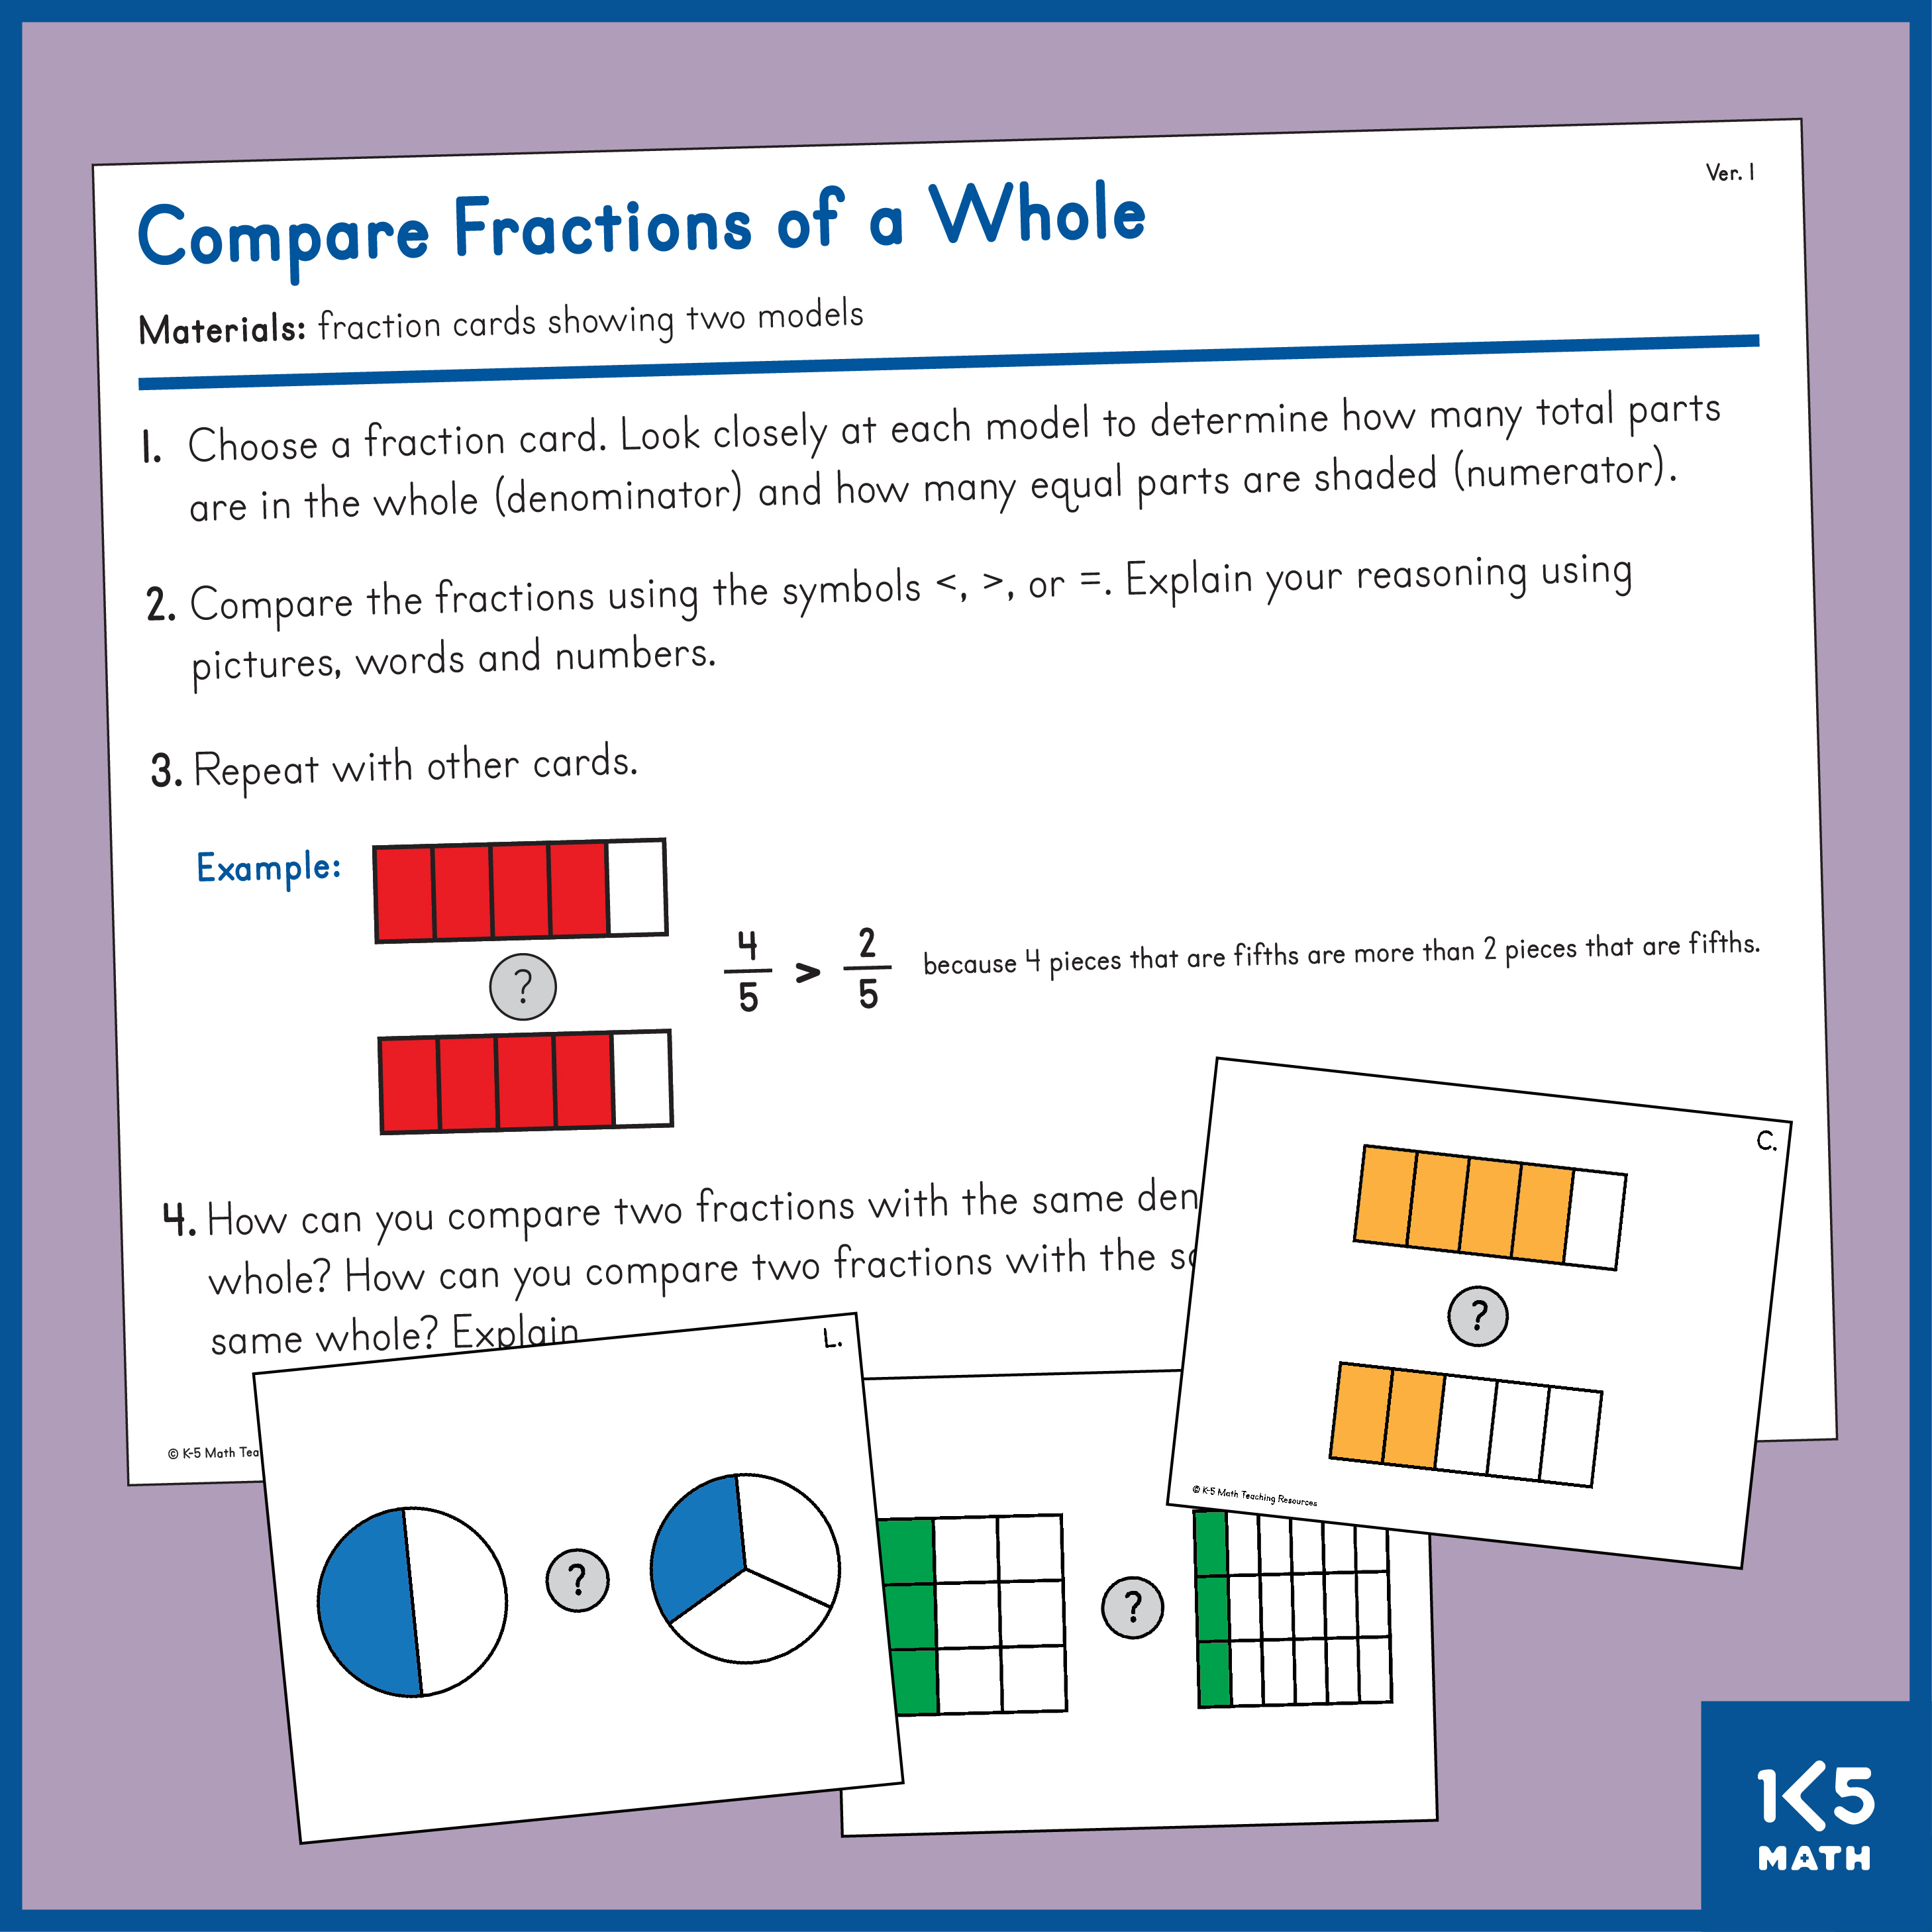 Compare Fractions of a Whole v.1